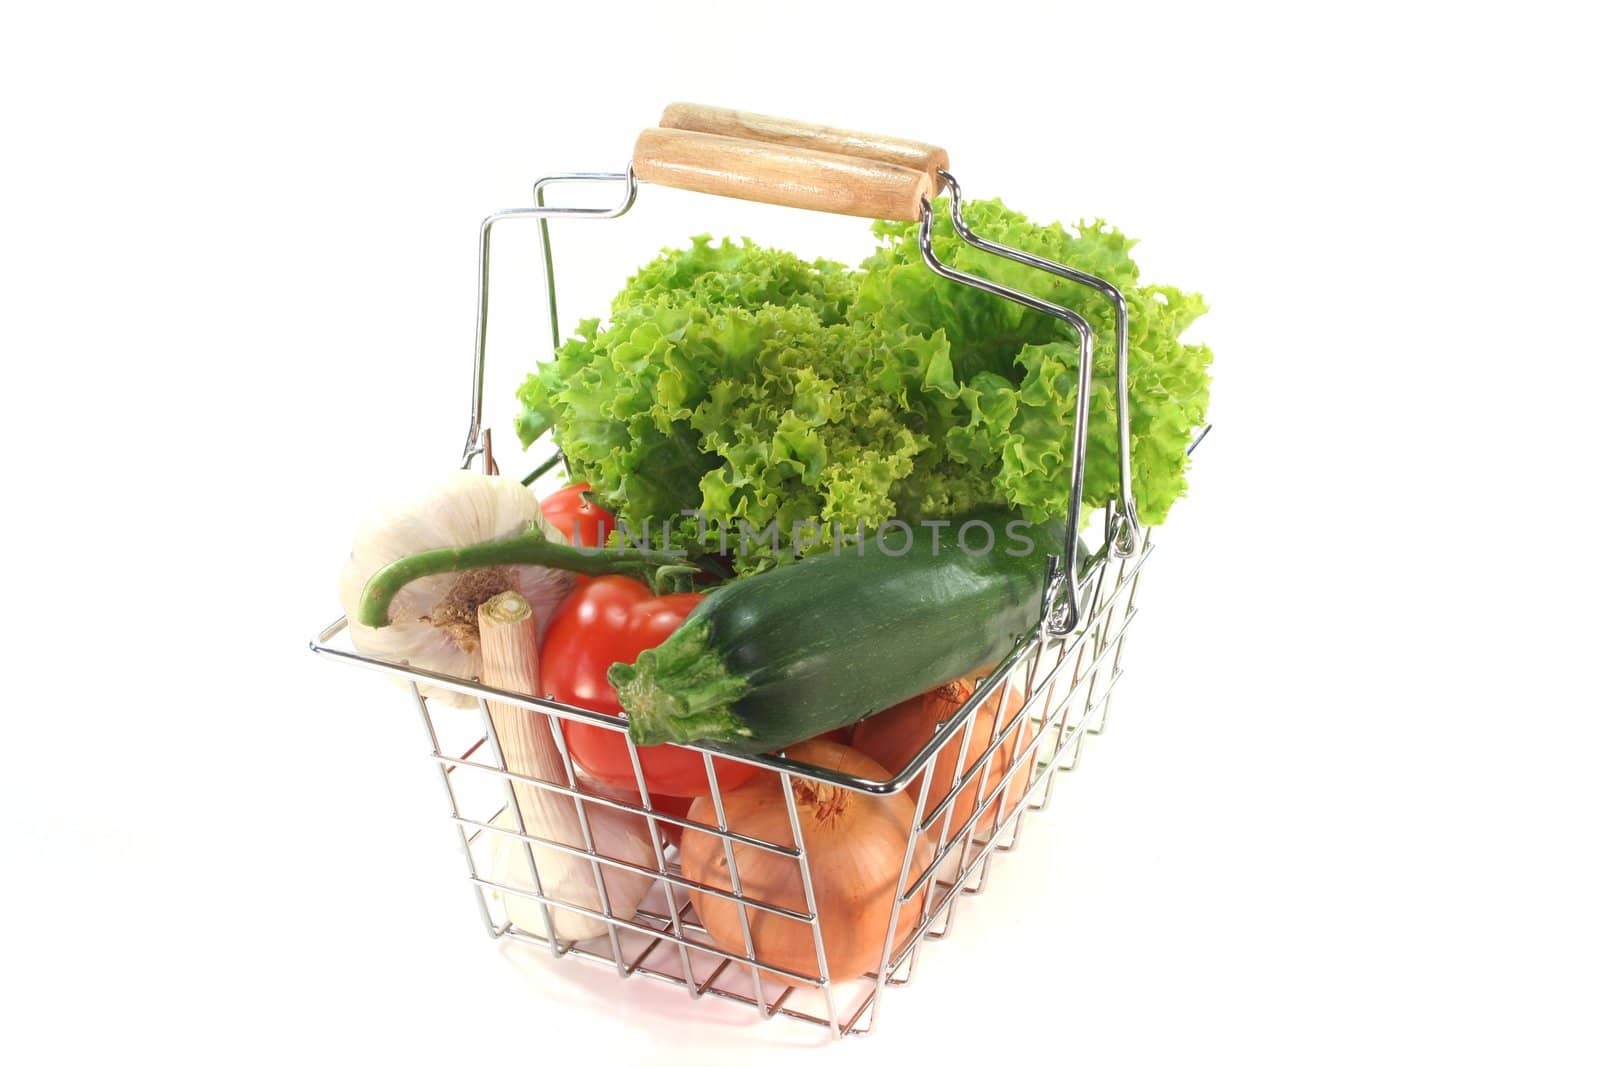 Vegetable mix in the Shopping cart by discovery